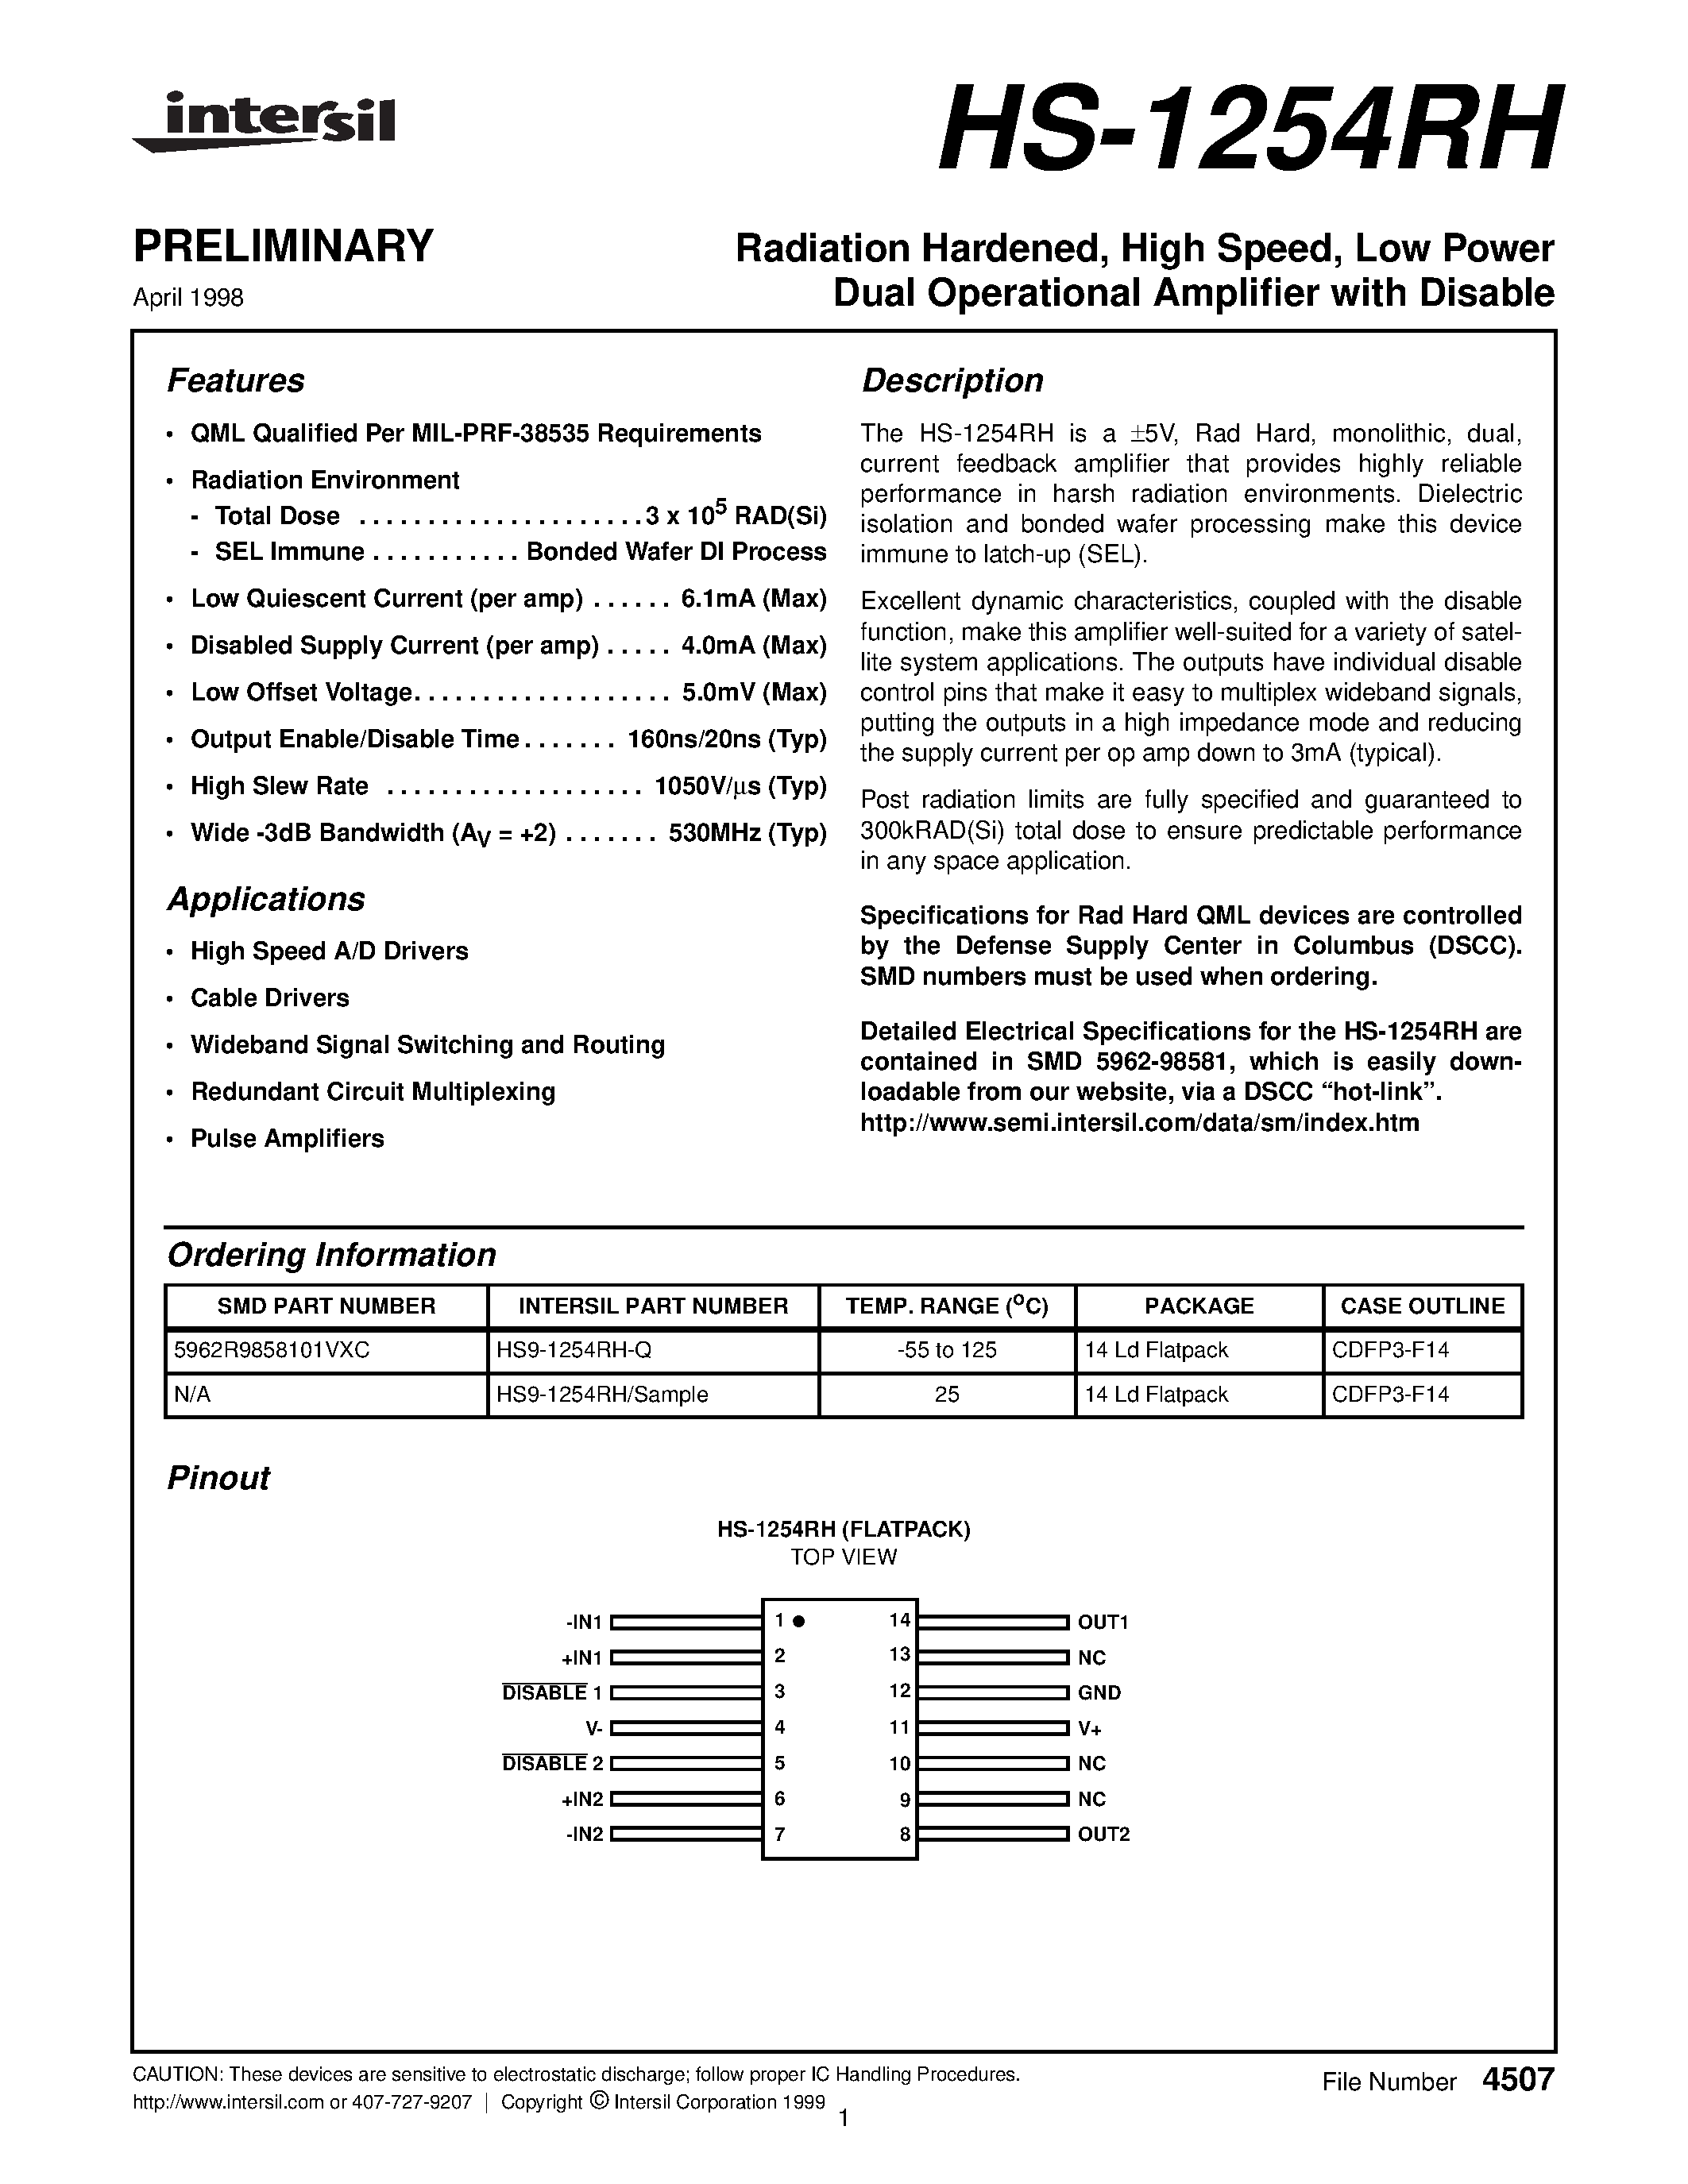 Datasheet HS9-1254RH-Q - Radiation Hardened/ High Speed/ Low Power Dual Operational Amplifier with Disable page 1